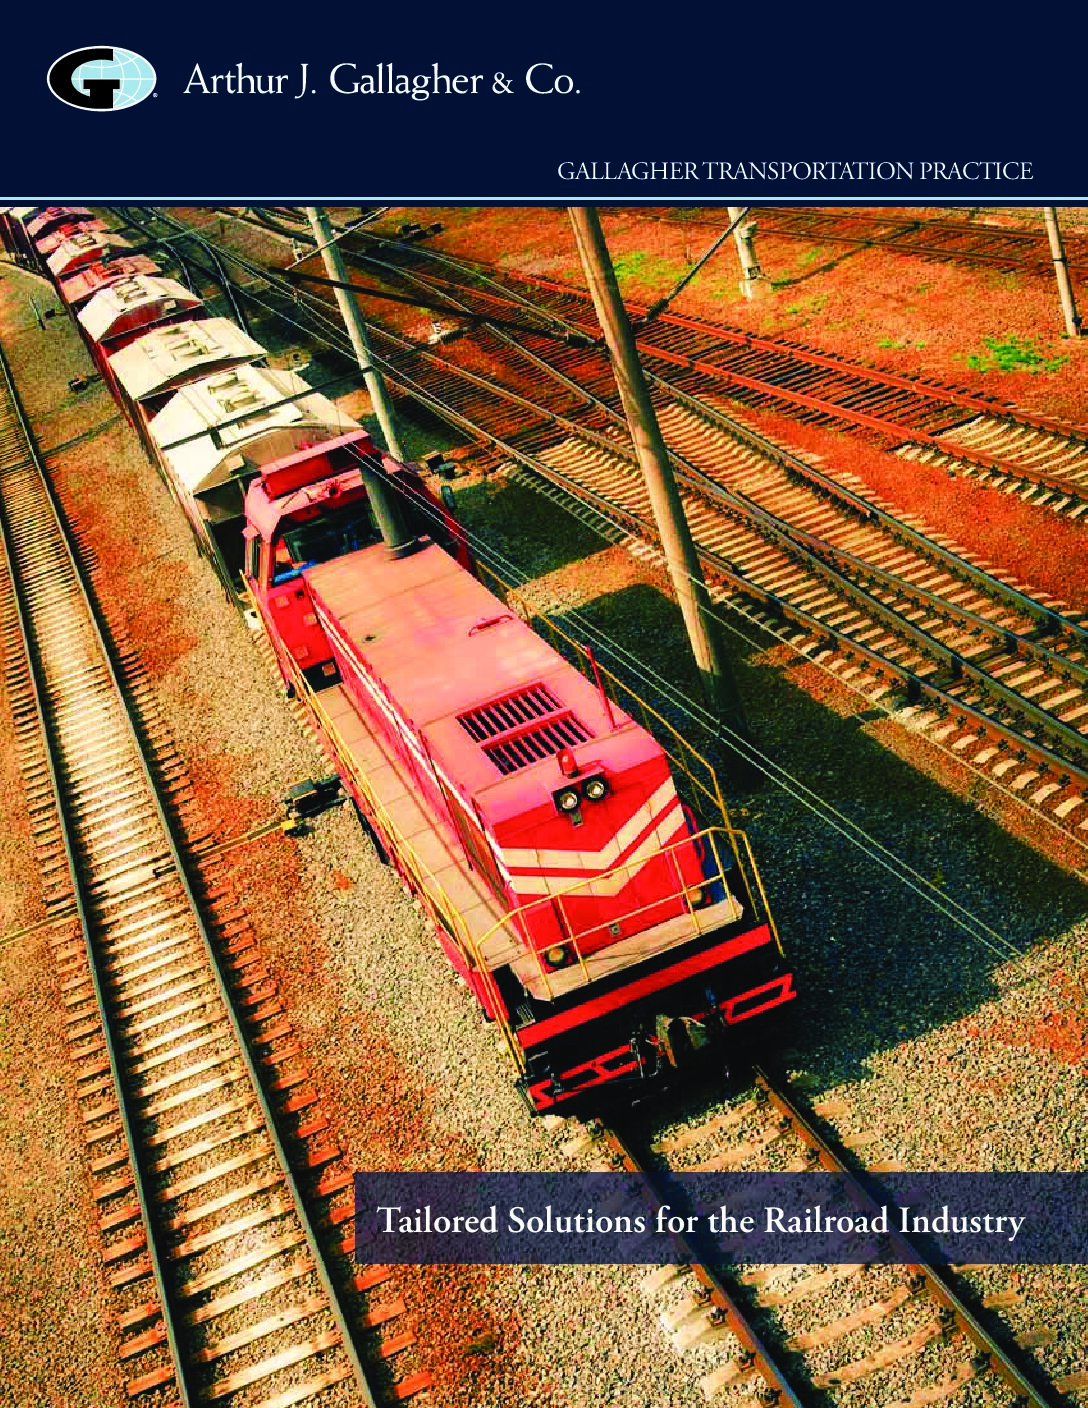 Arthur J. Gallagher & Co: Tailored Solutions for the Railroad Industry